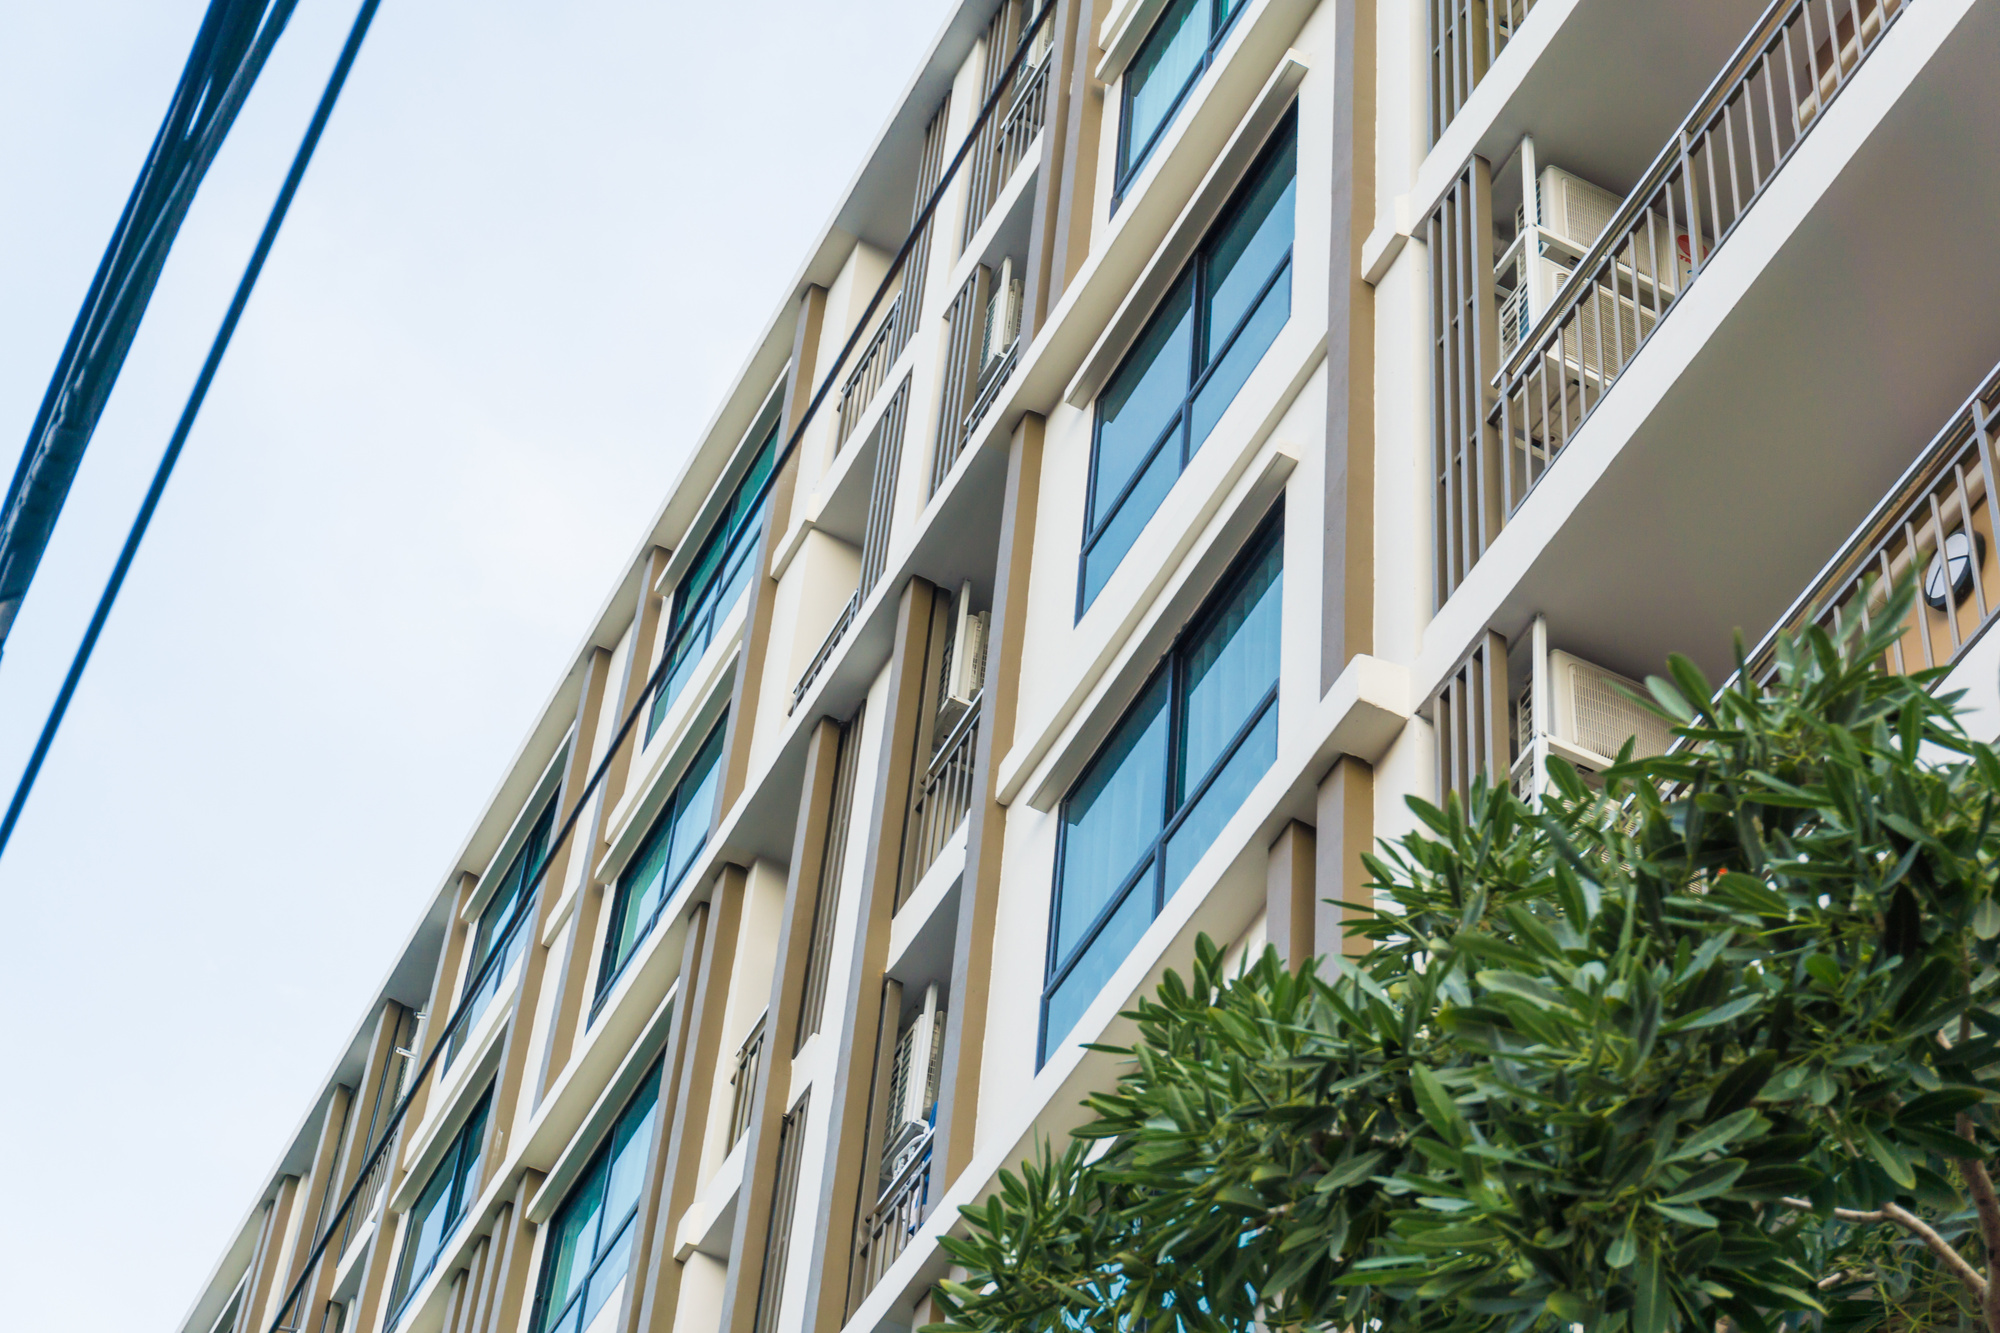 Finding the right condominium for your living situation requires knowing what not to do. Here are common condo purchasing mistakes and how to avoid them.